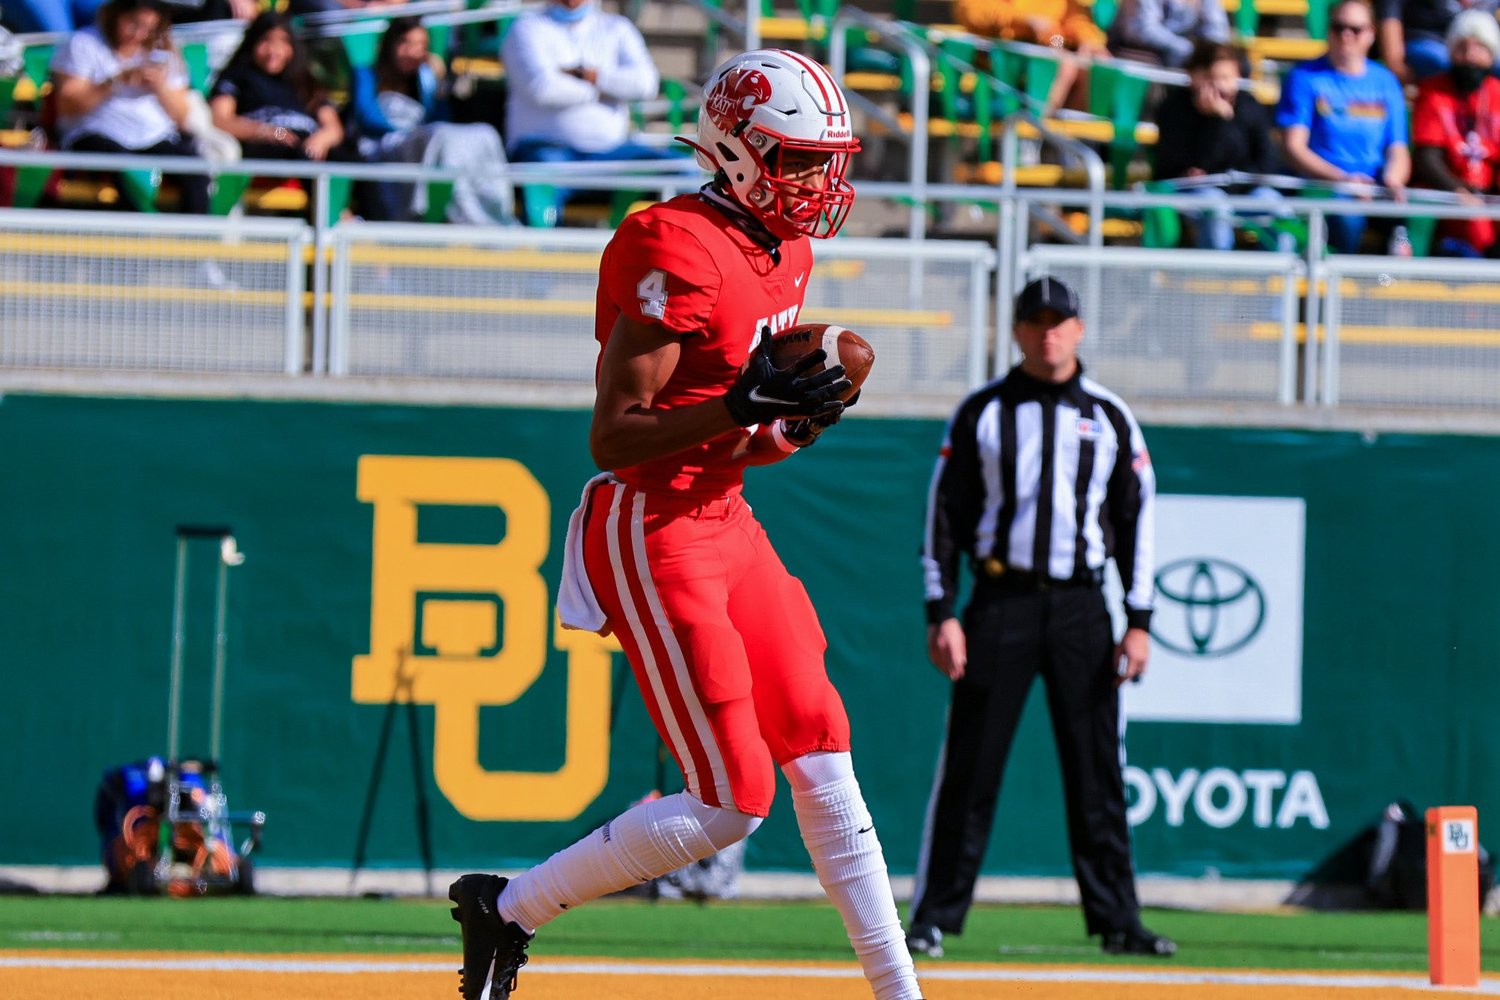 Katy High junior receiver Nic Anderson catches a 12-yard touchdown pass during the Tigers' Class 6A-Division II state semifinal win over Buda Hays on Jan. 9 at McLane Stadium in Waco.